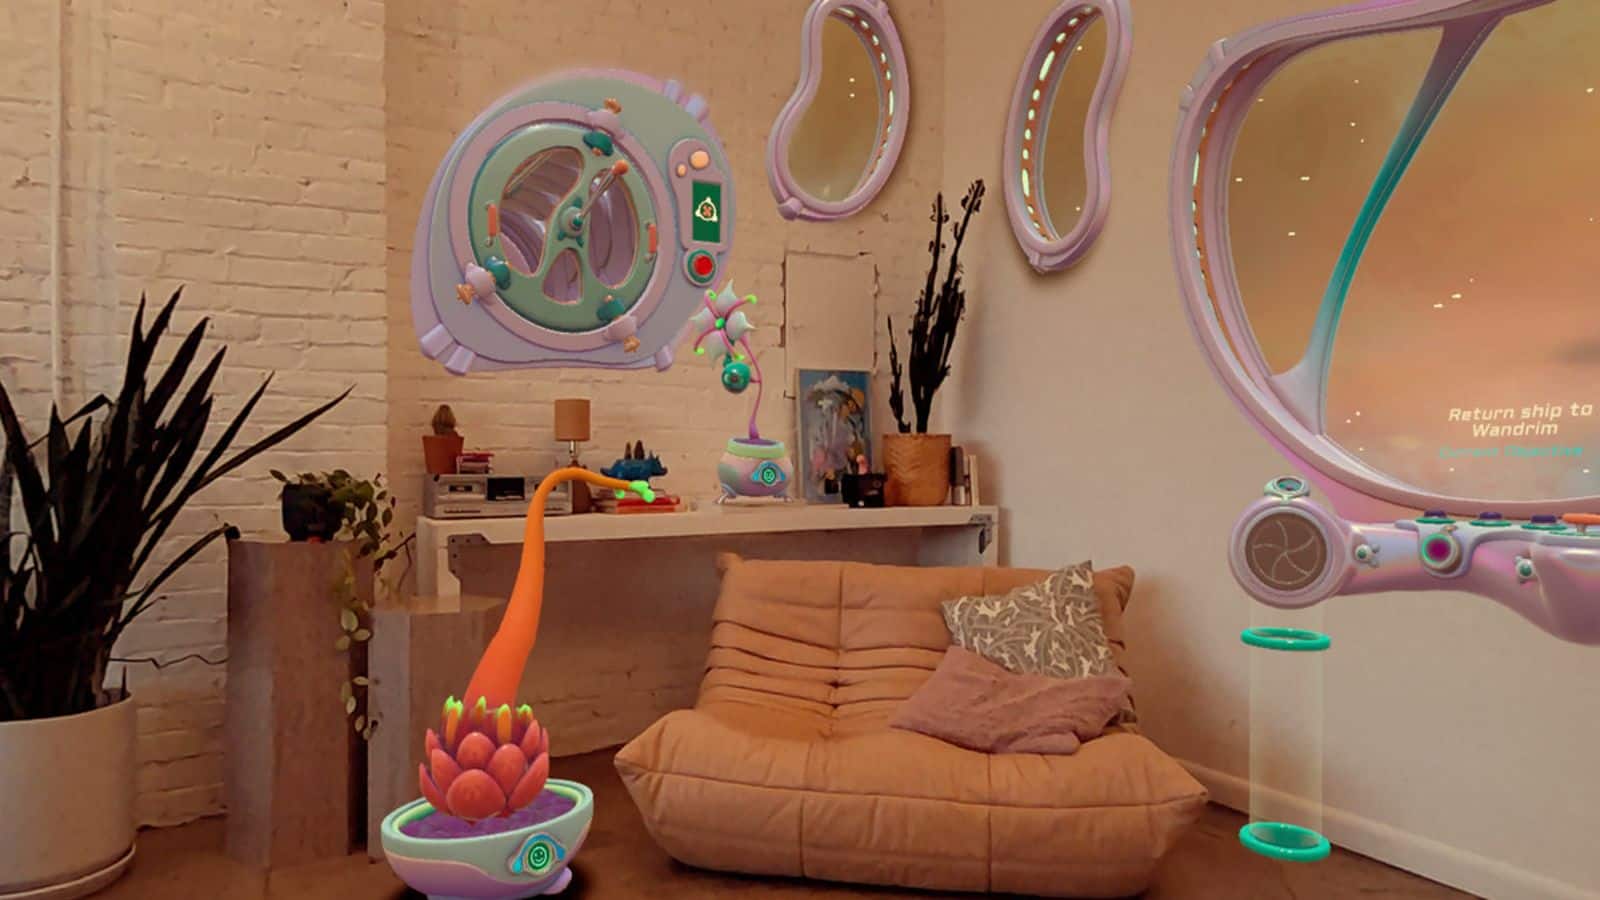 This mixed-reality game transforms your room into custom spaceship